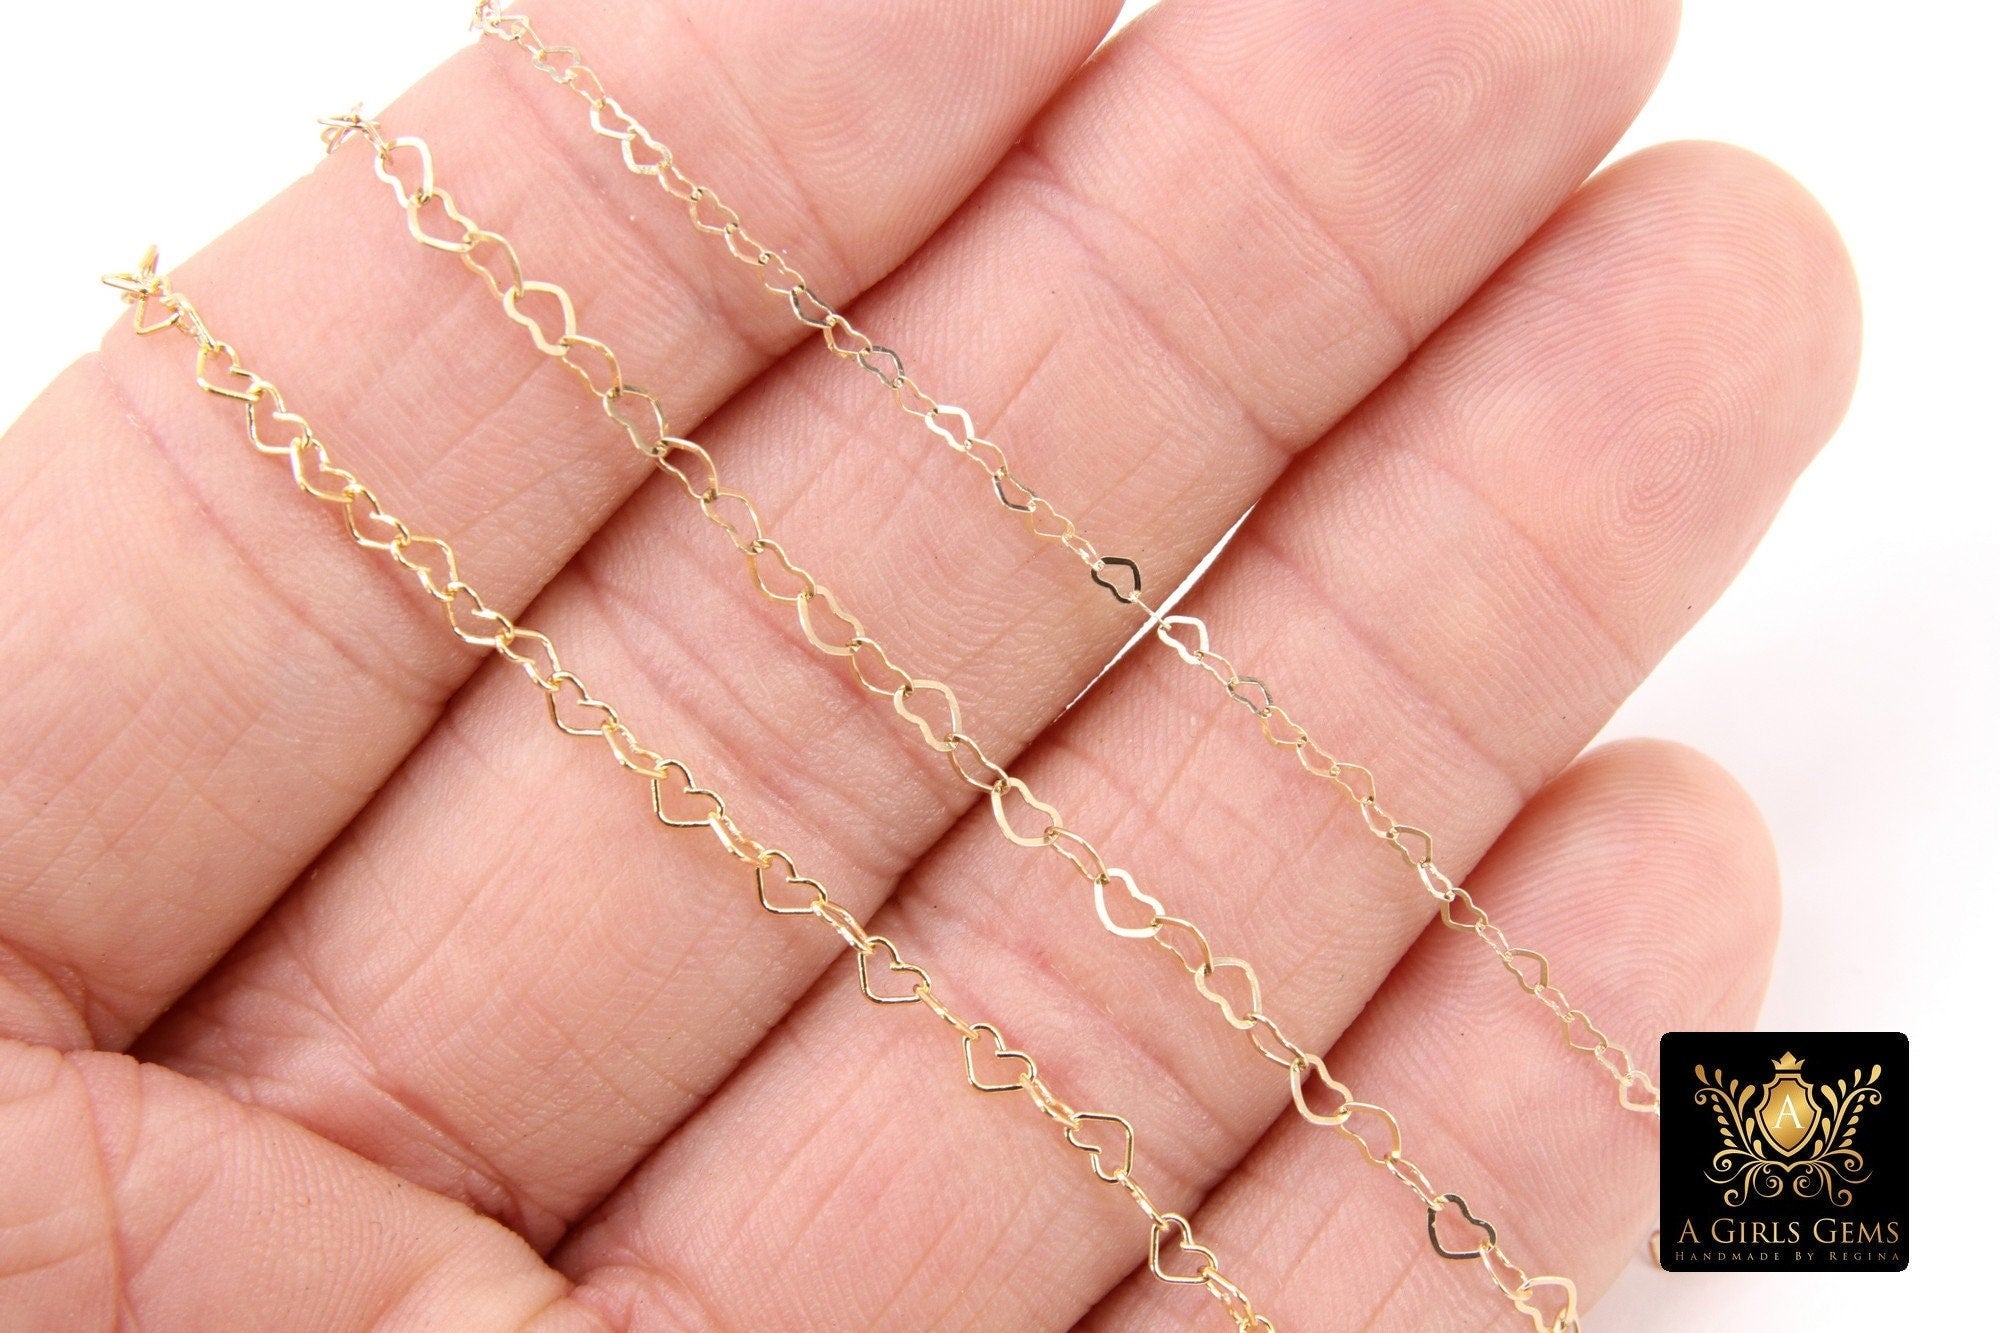 Gold Filled Heart Chains, 2.6 or 3.9 mm 12 K Gold Dainty Heart Shaped Chain CH #718, 5 mm Unfinished Designer Jewelry Chain